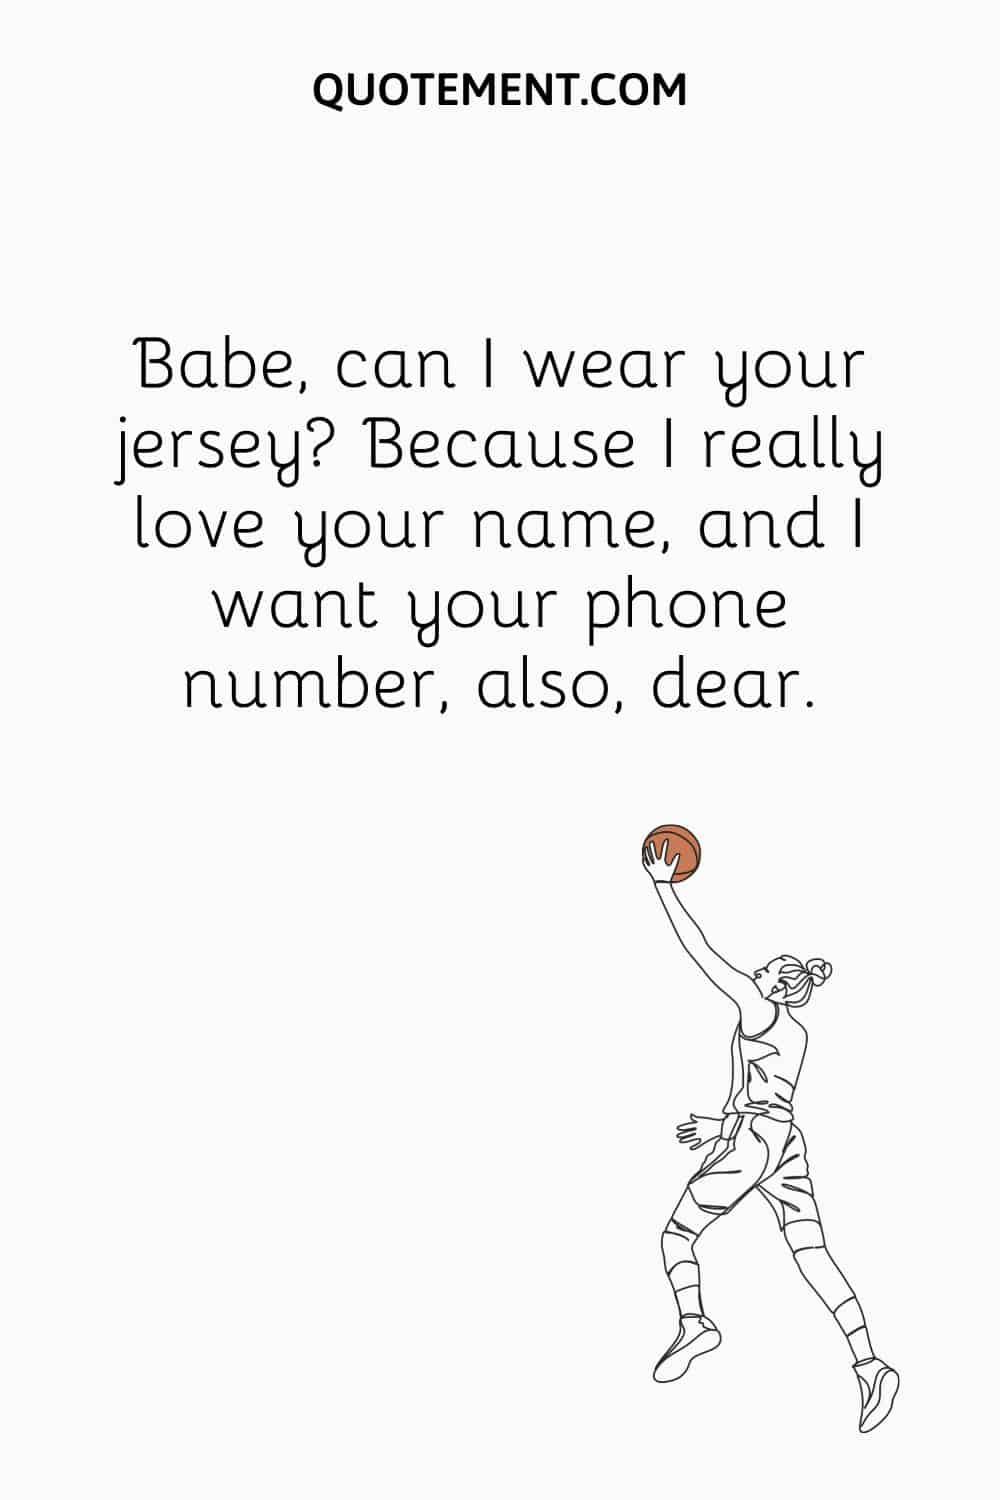 Babe, can I wear your jersey Because I really love your name, and I want your phone number, also, dear.